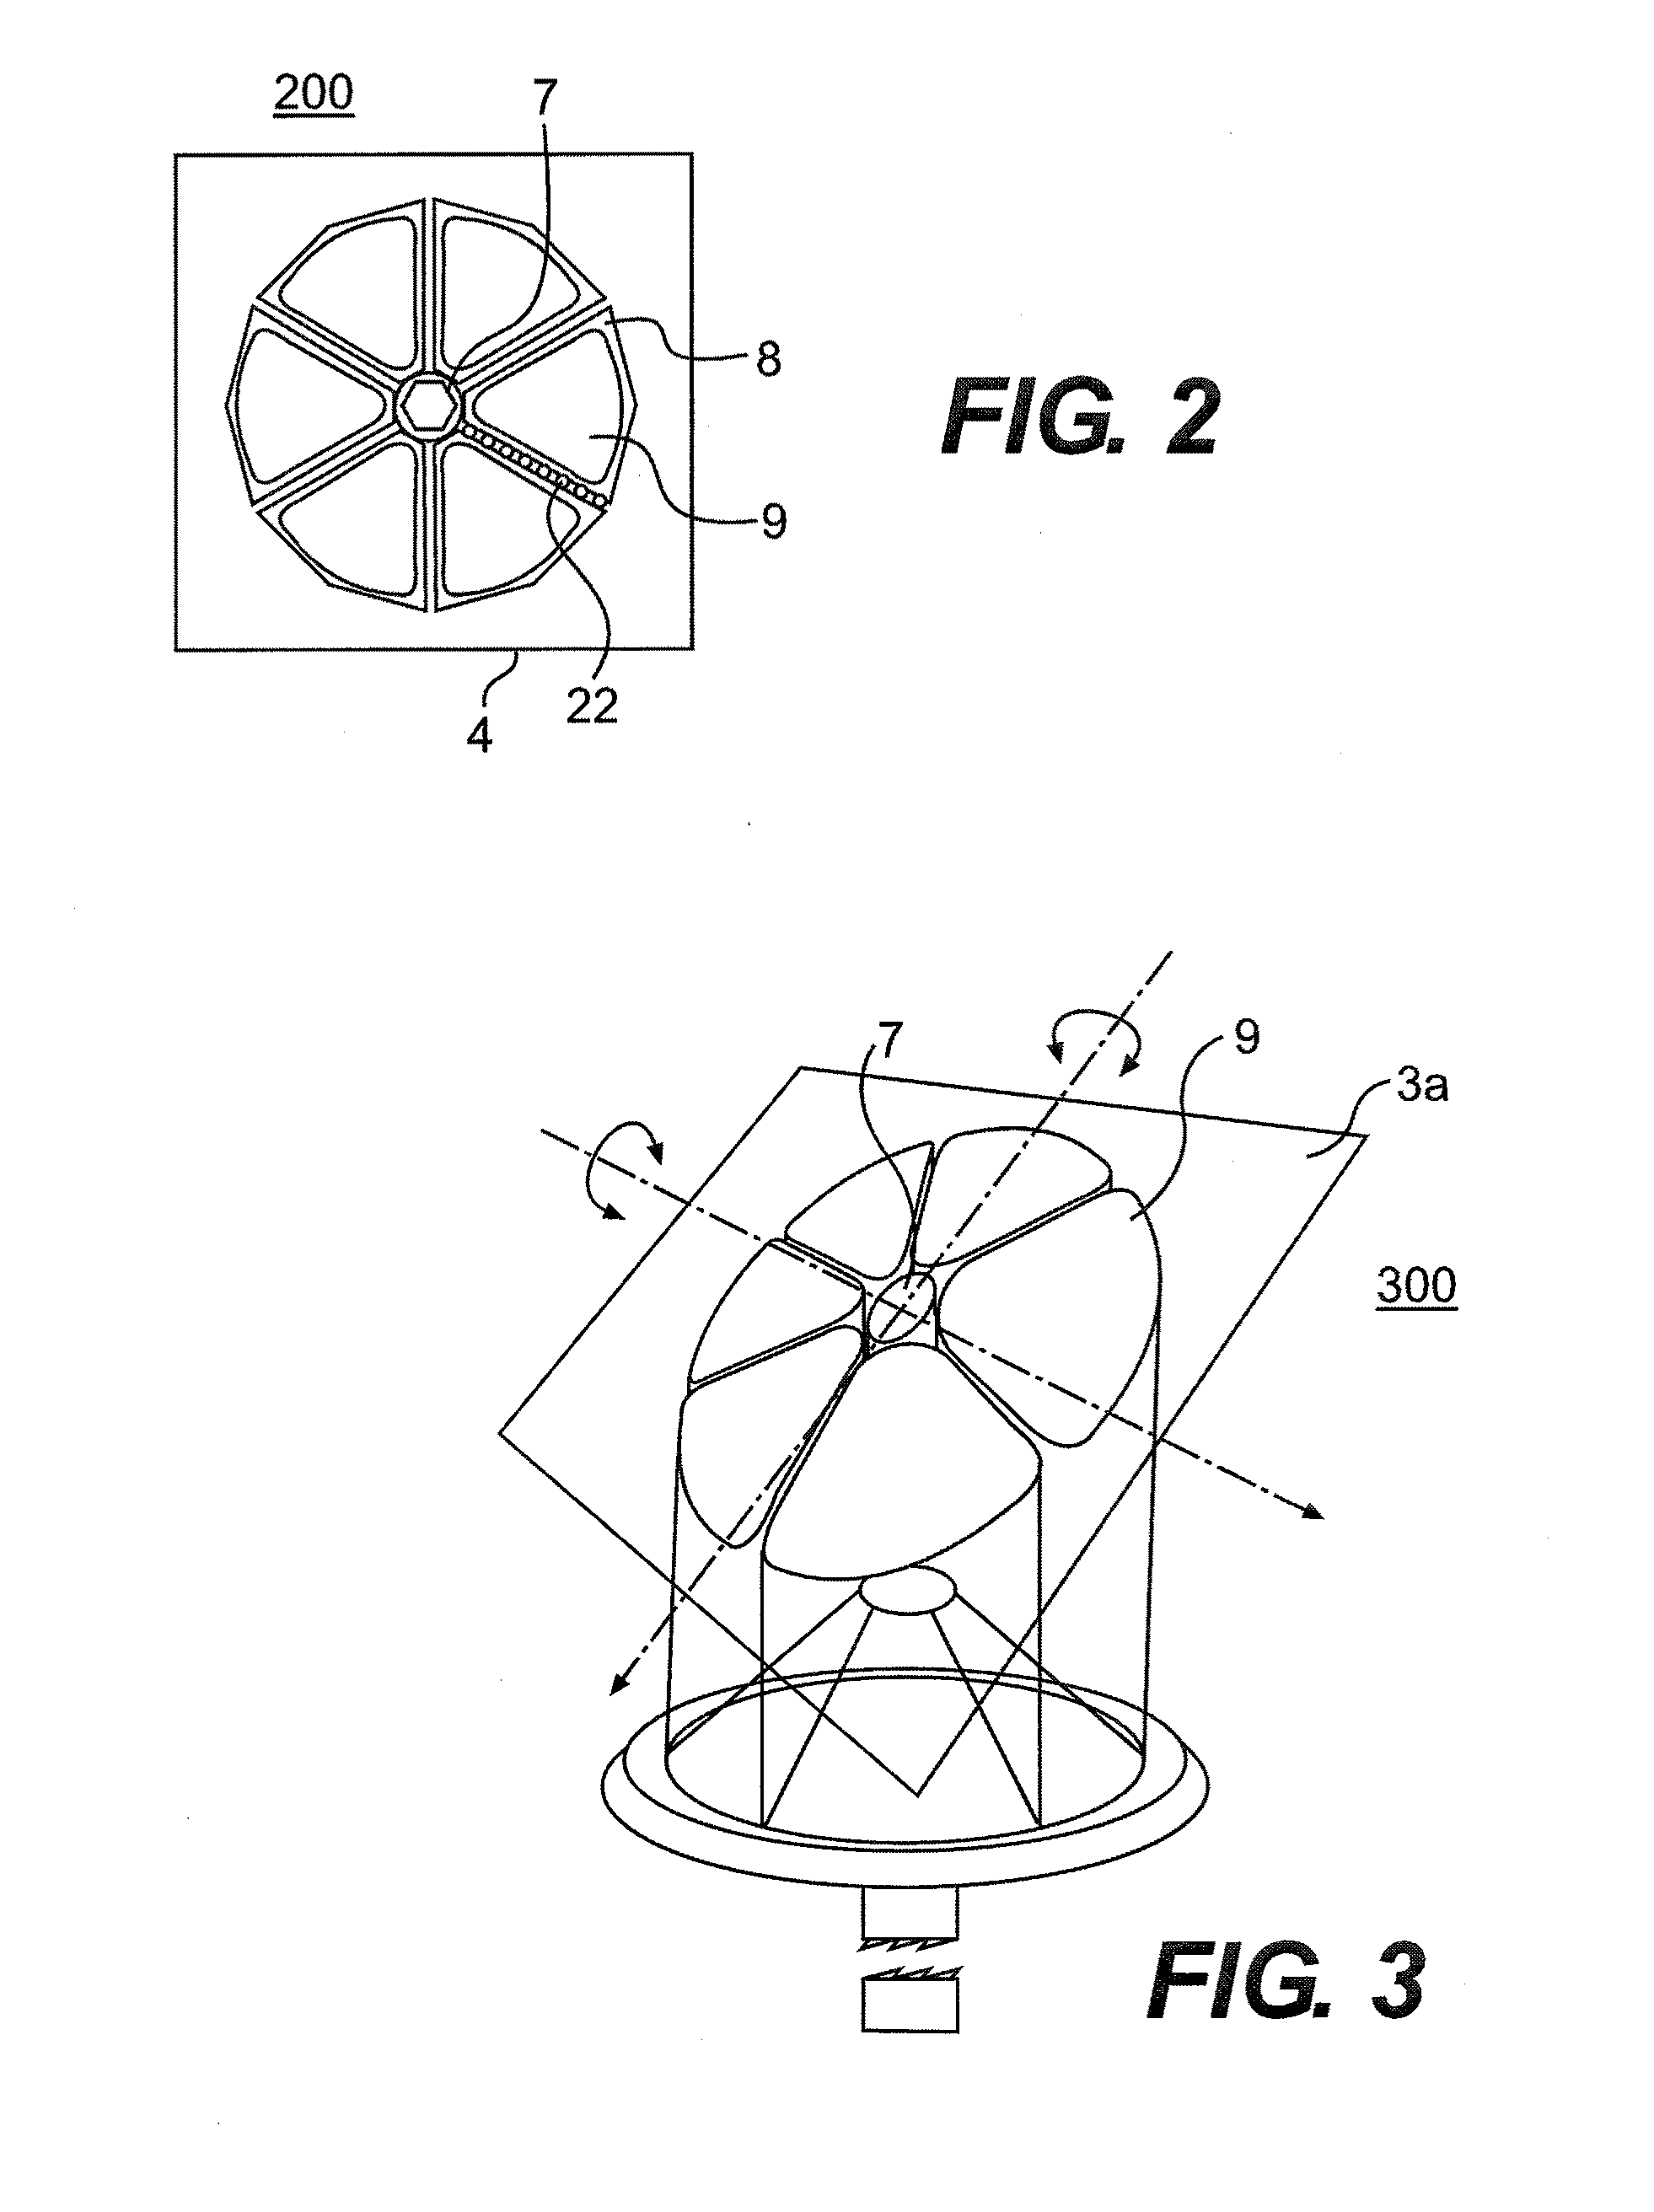 Multi-Axis Metamorphic Actuator and Drive System and Method